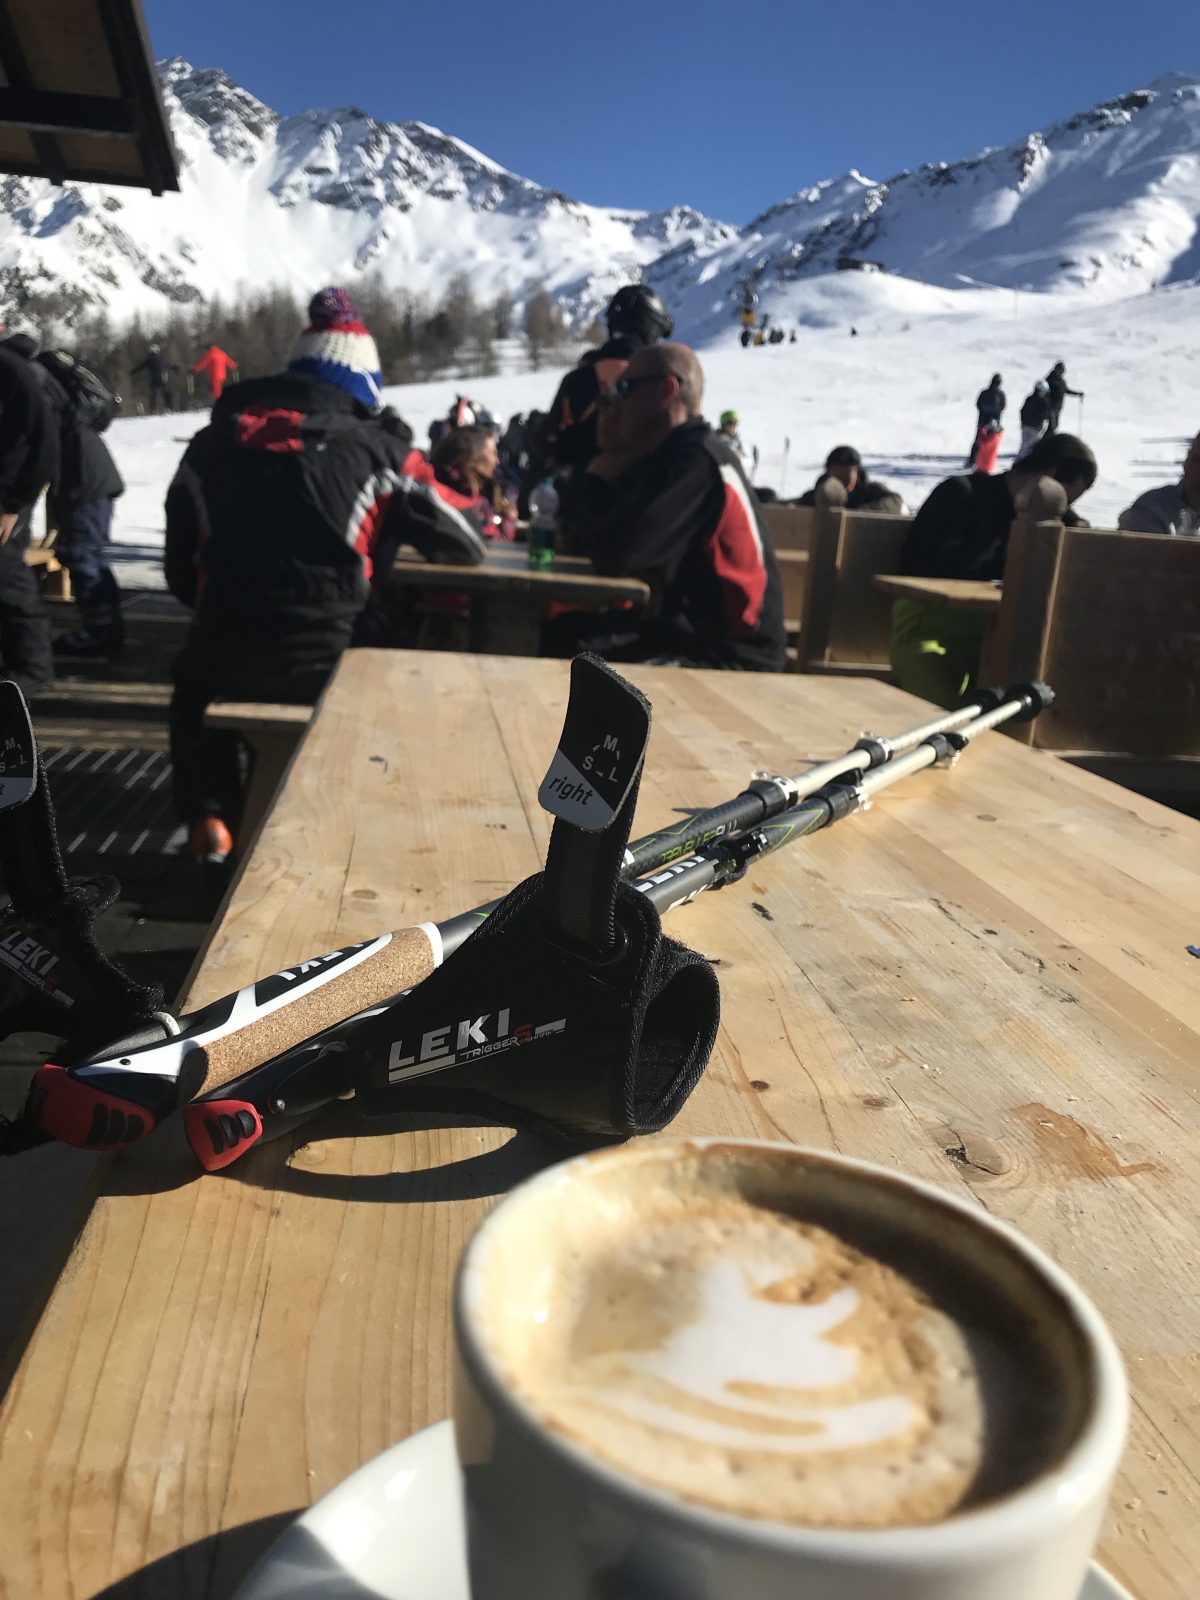 Up at Cafe Grimod for a coffee, seeing my husband and kids doing some laps. At least the weather was nice for being on the deck. Photo: The-Ski-Guru. The Half Term Family Ski Holiday that did not result as planned.